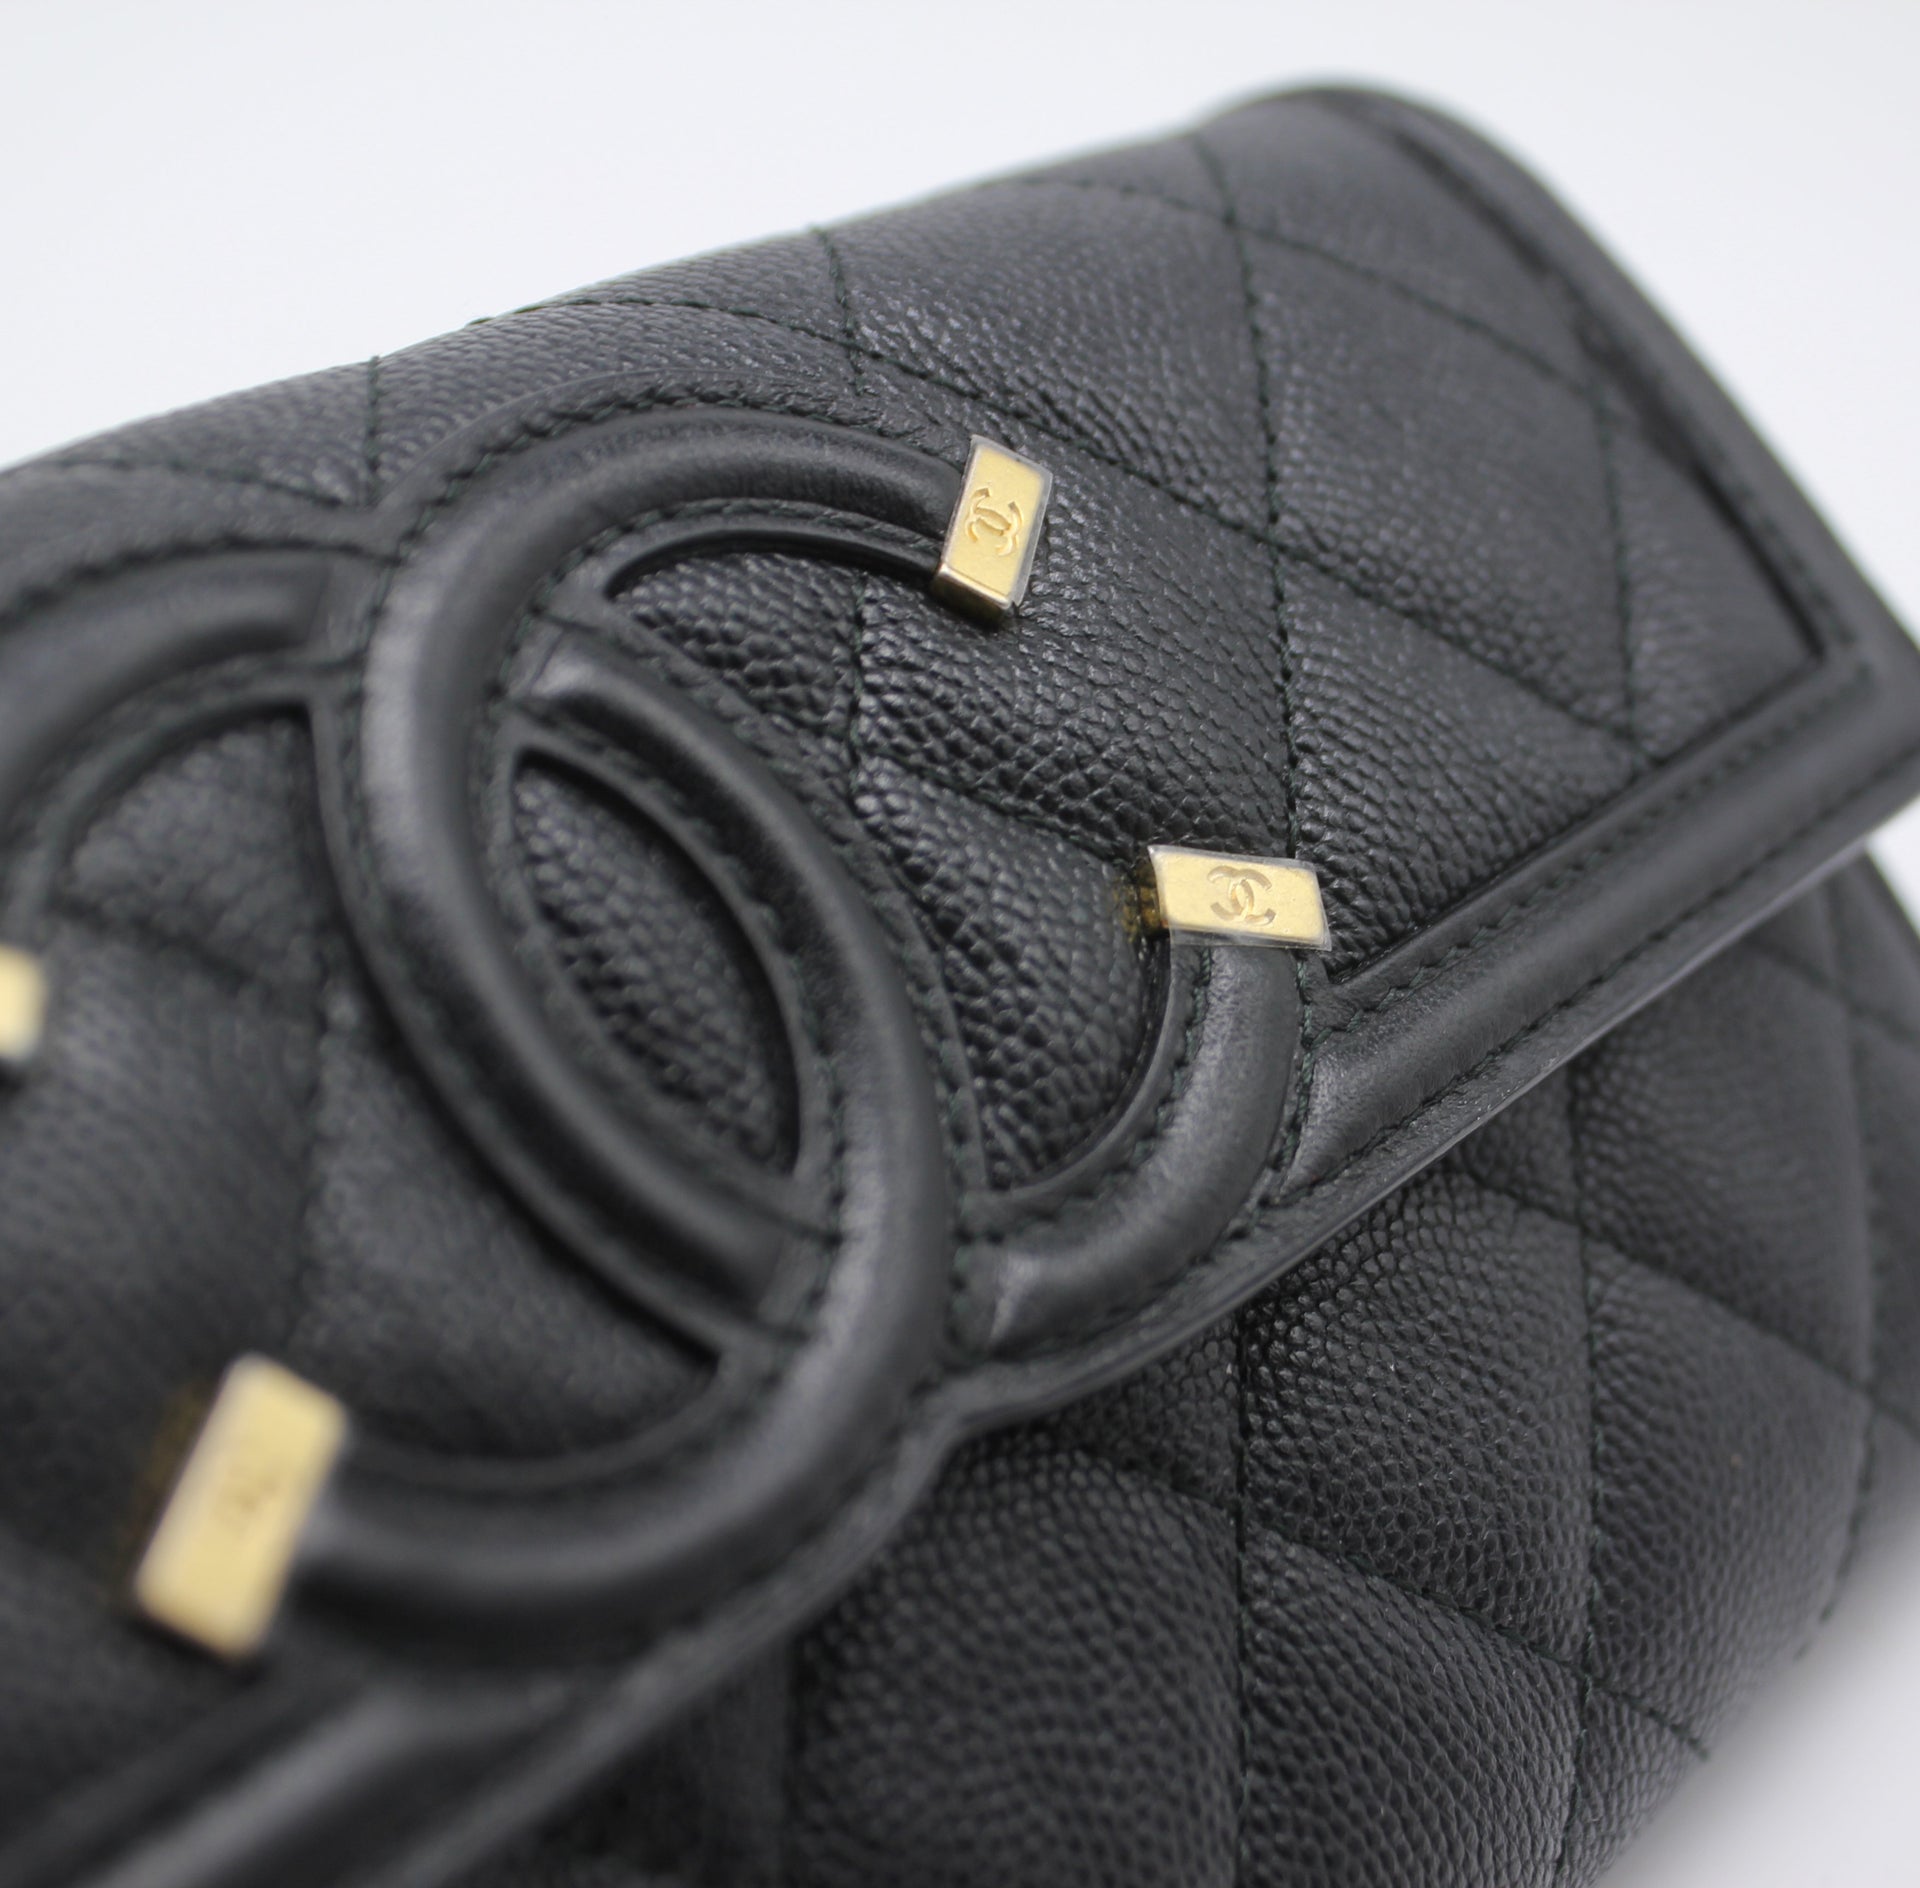 Black Quilted Caviar Long Flap Wallet